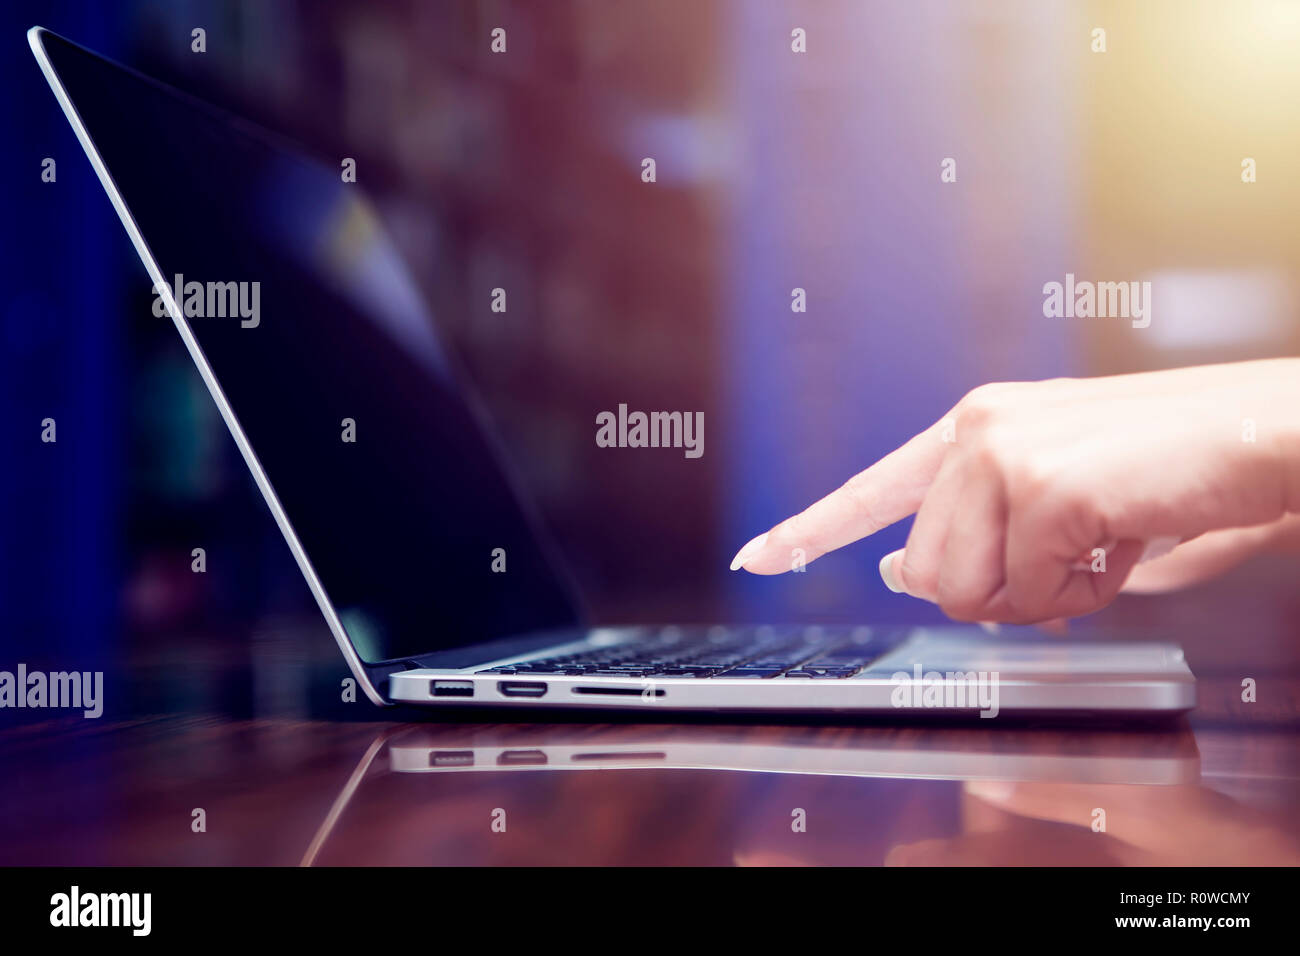 Business and technology concept. Closeup hand touching a button on keyboard with free copy space. E-commerce or online business. Network connection. Stock Photo